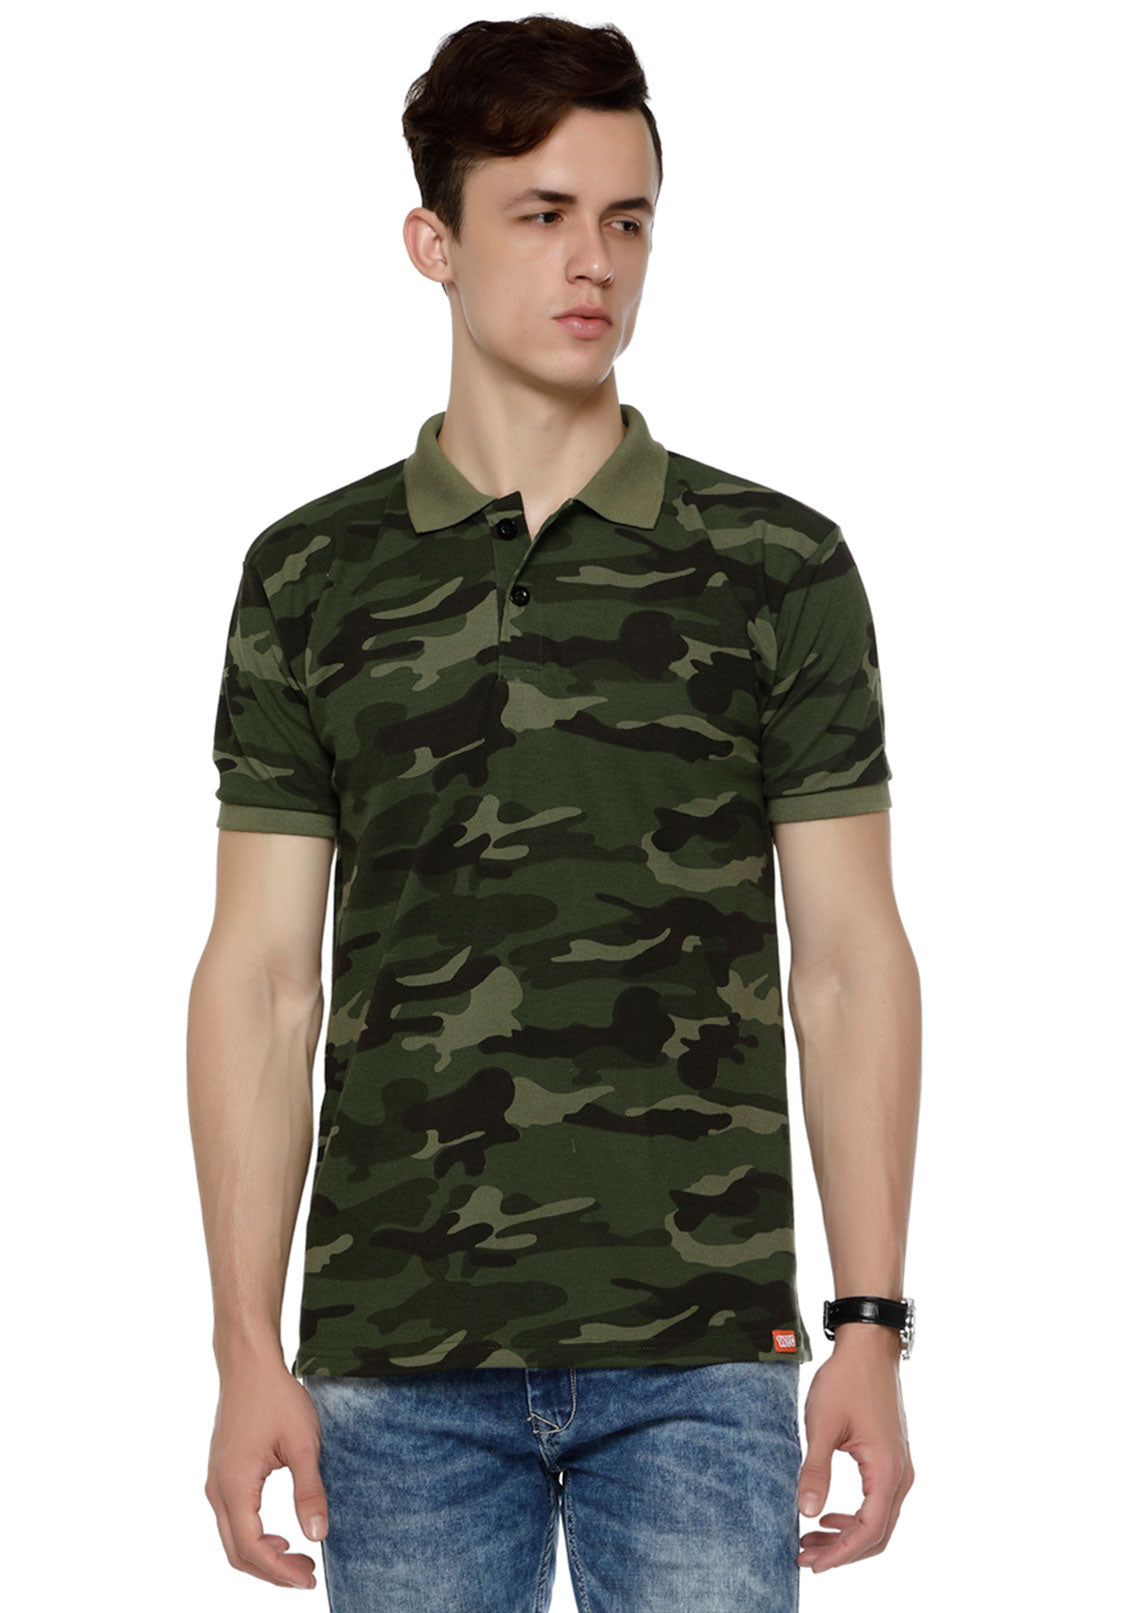 Army Green Camouflage Polo T Shirt - Wear Your Opinion| WYO – Wear Your ...